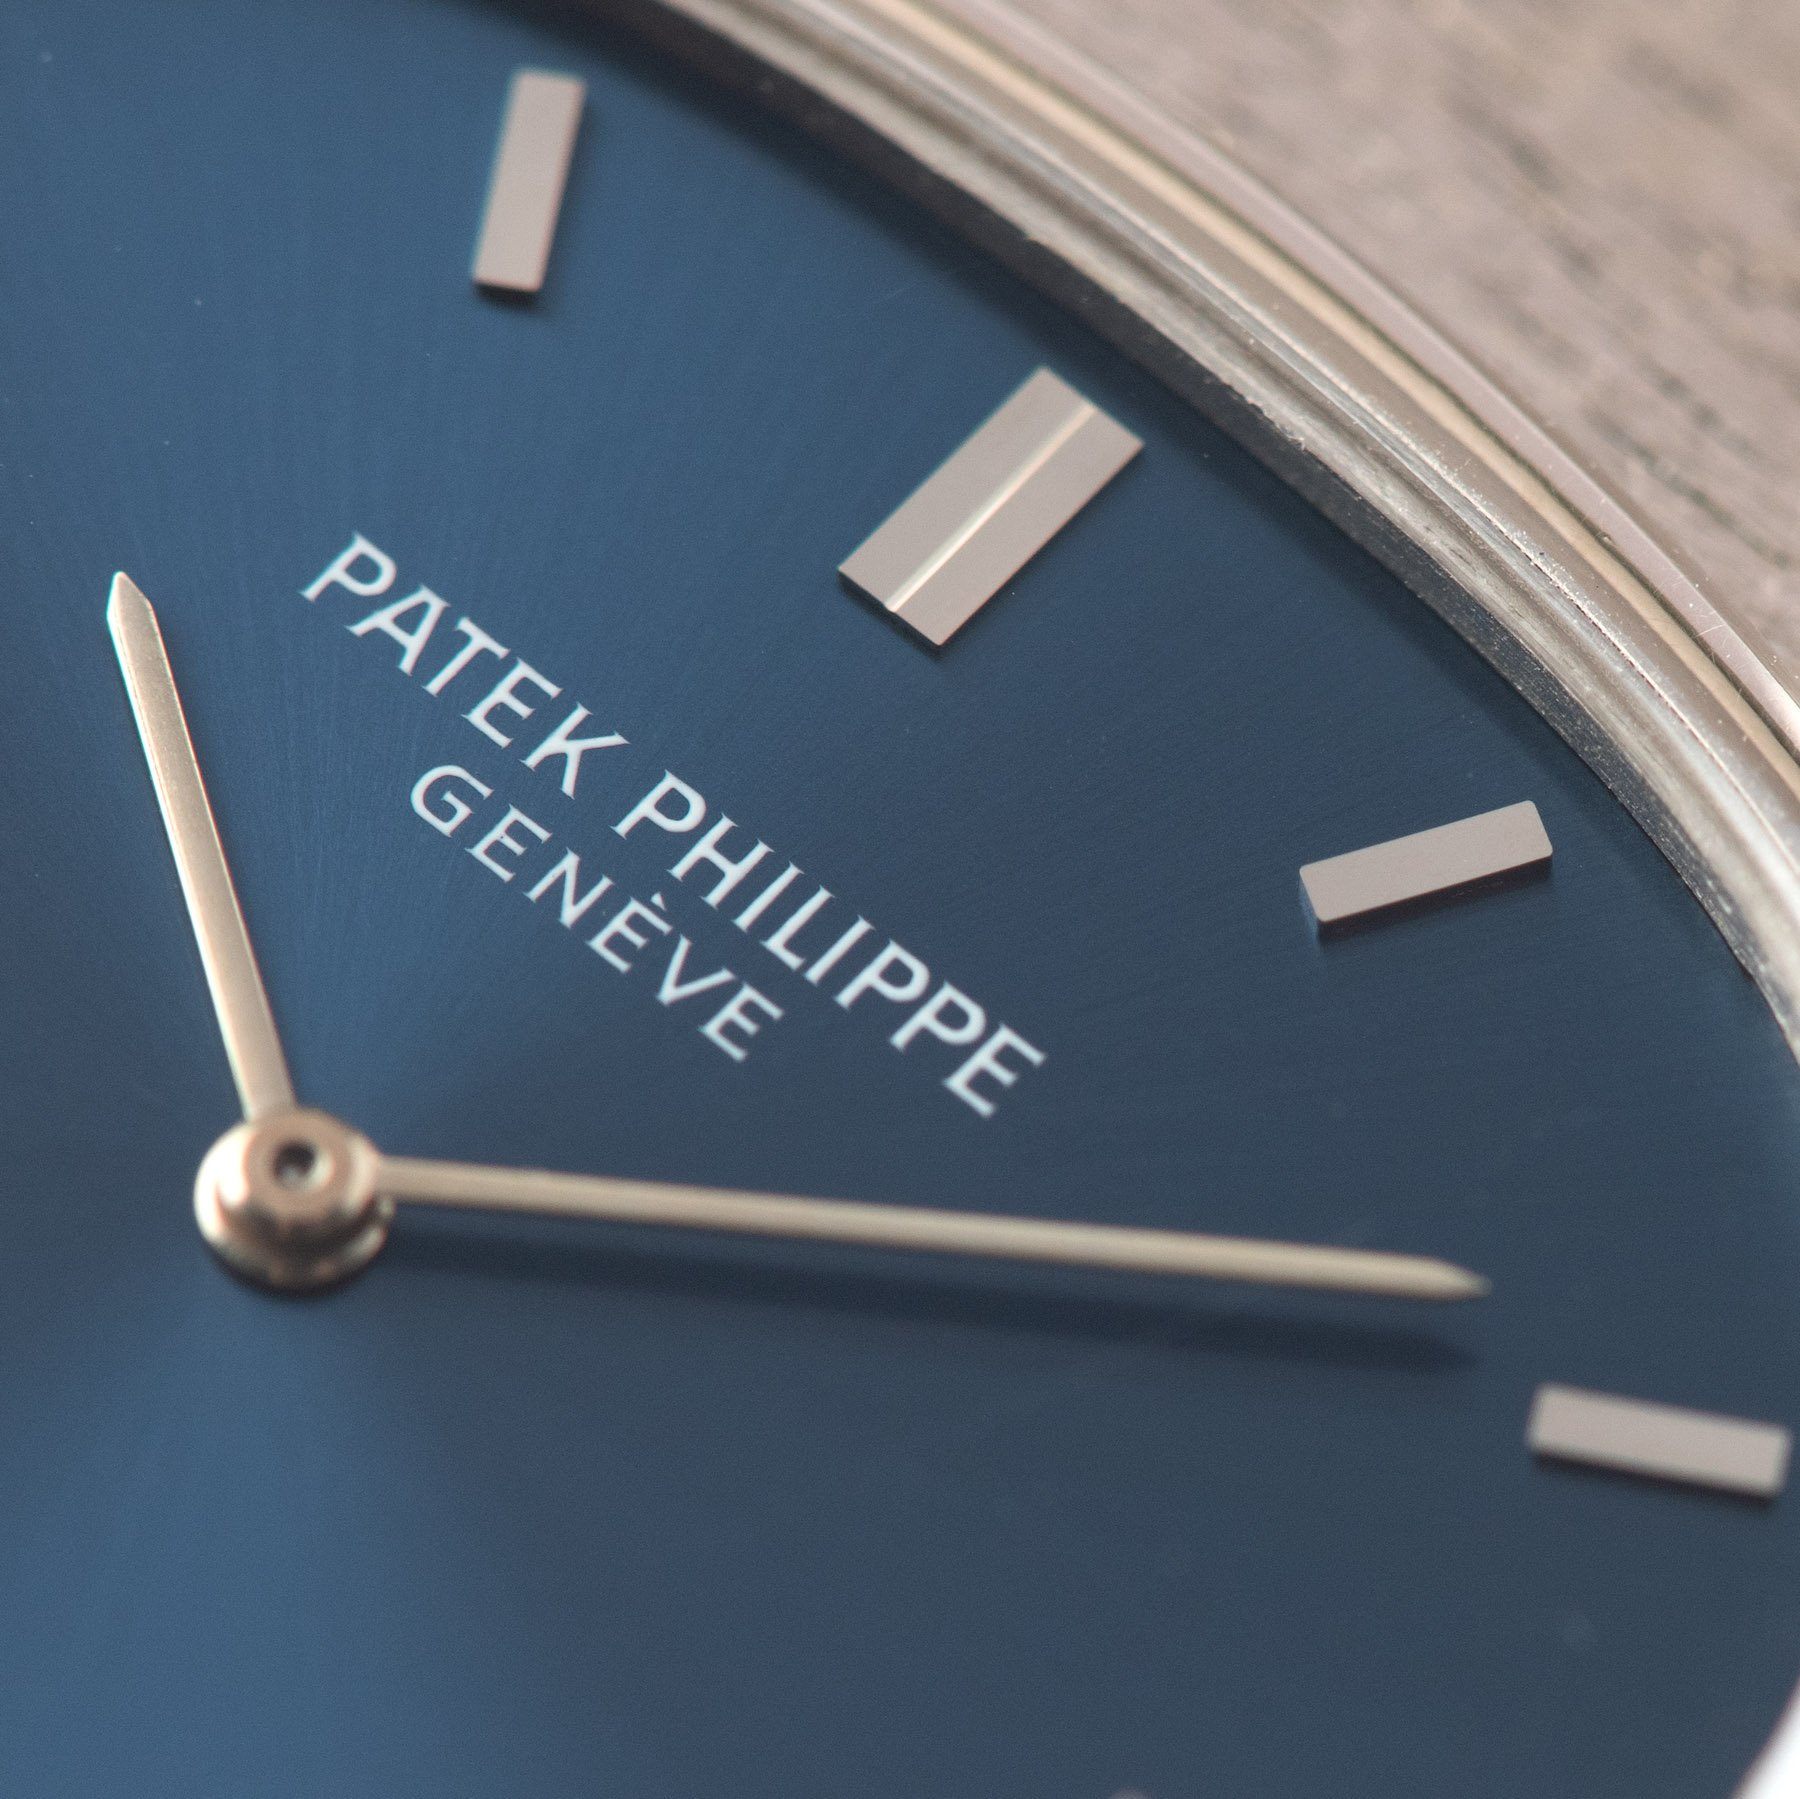 Patek Philippe Horizontal Ellipse White Gold Ref 3845/909 with solid gold hour markers